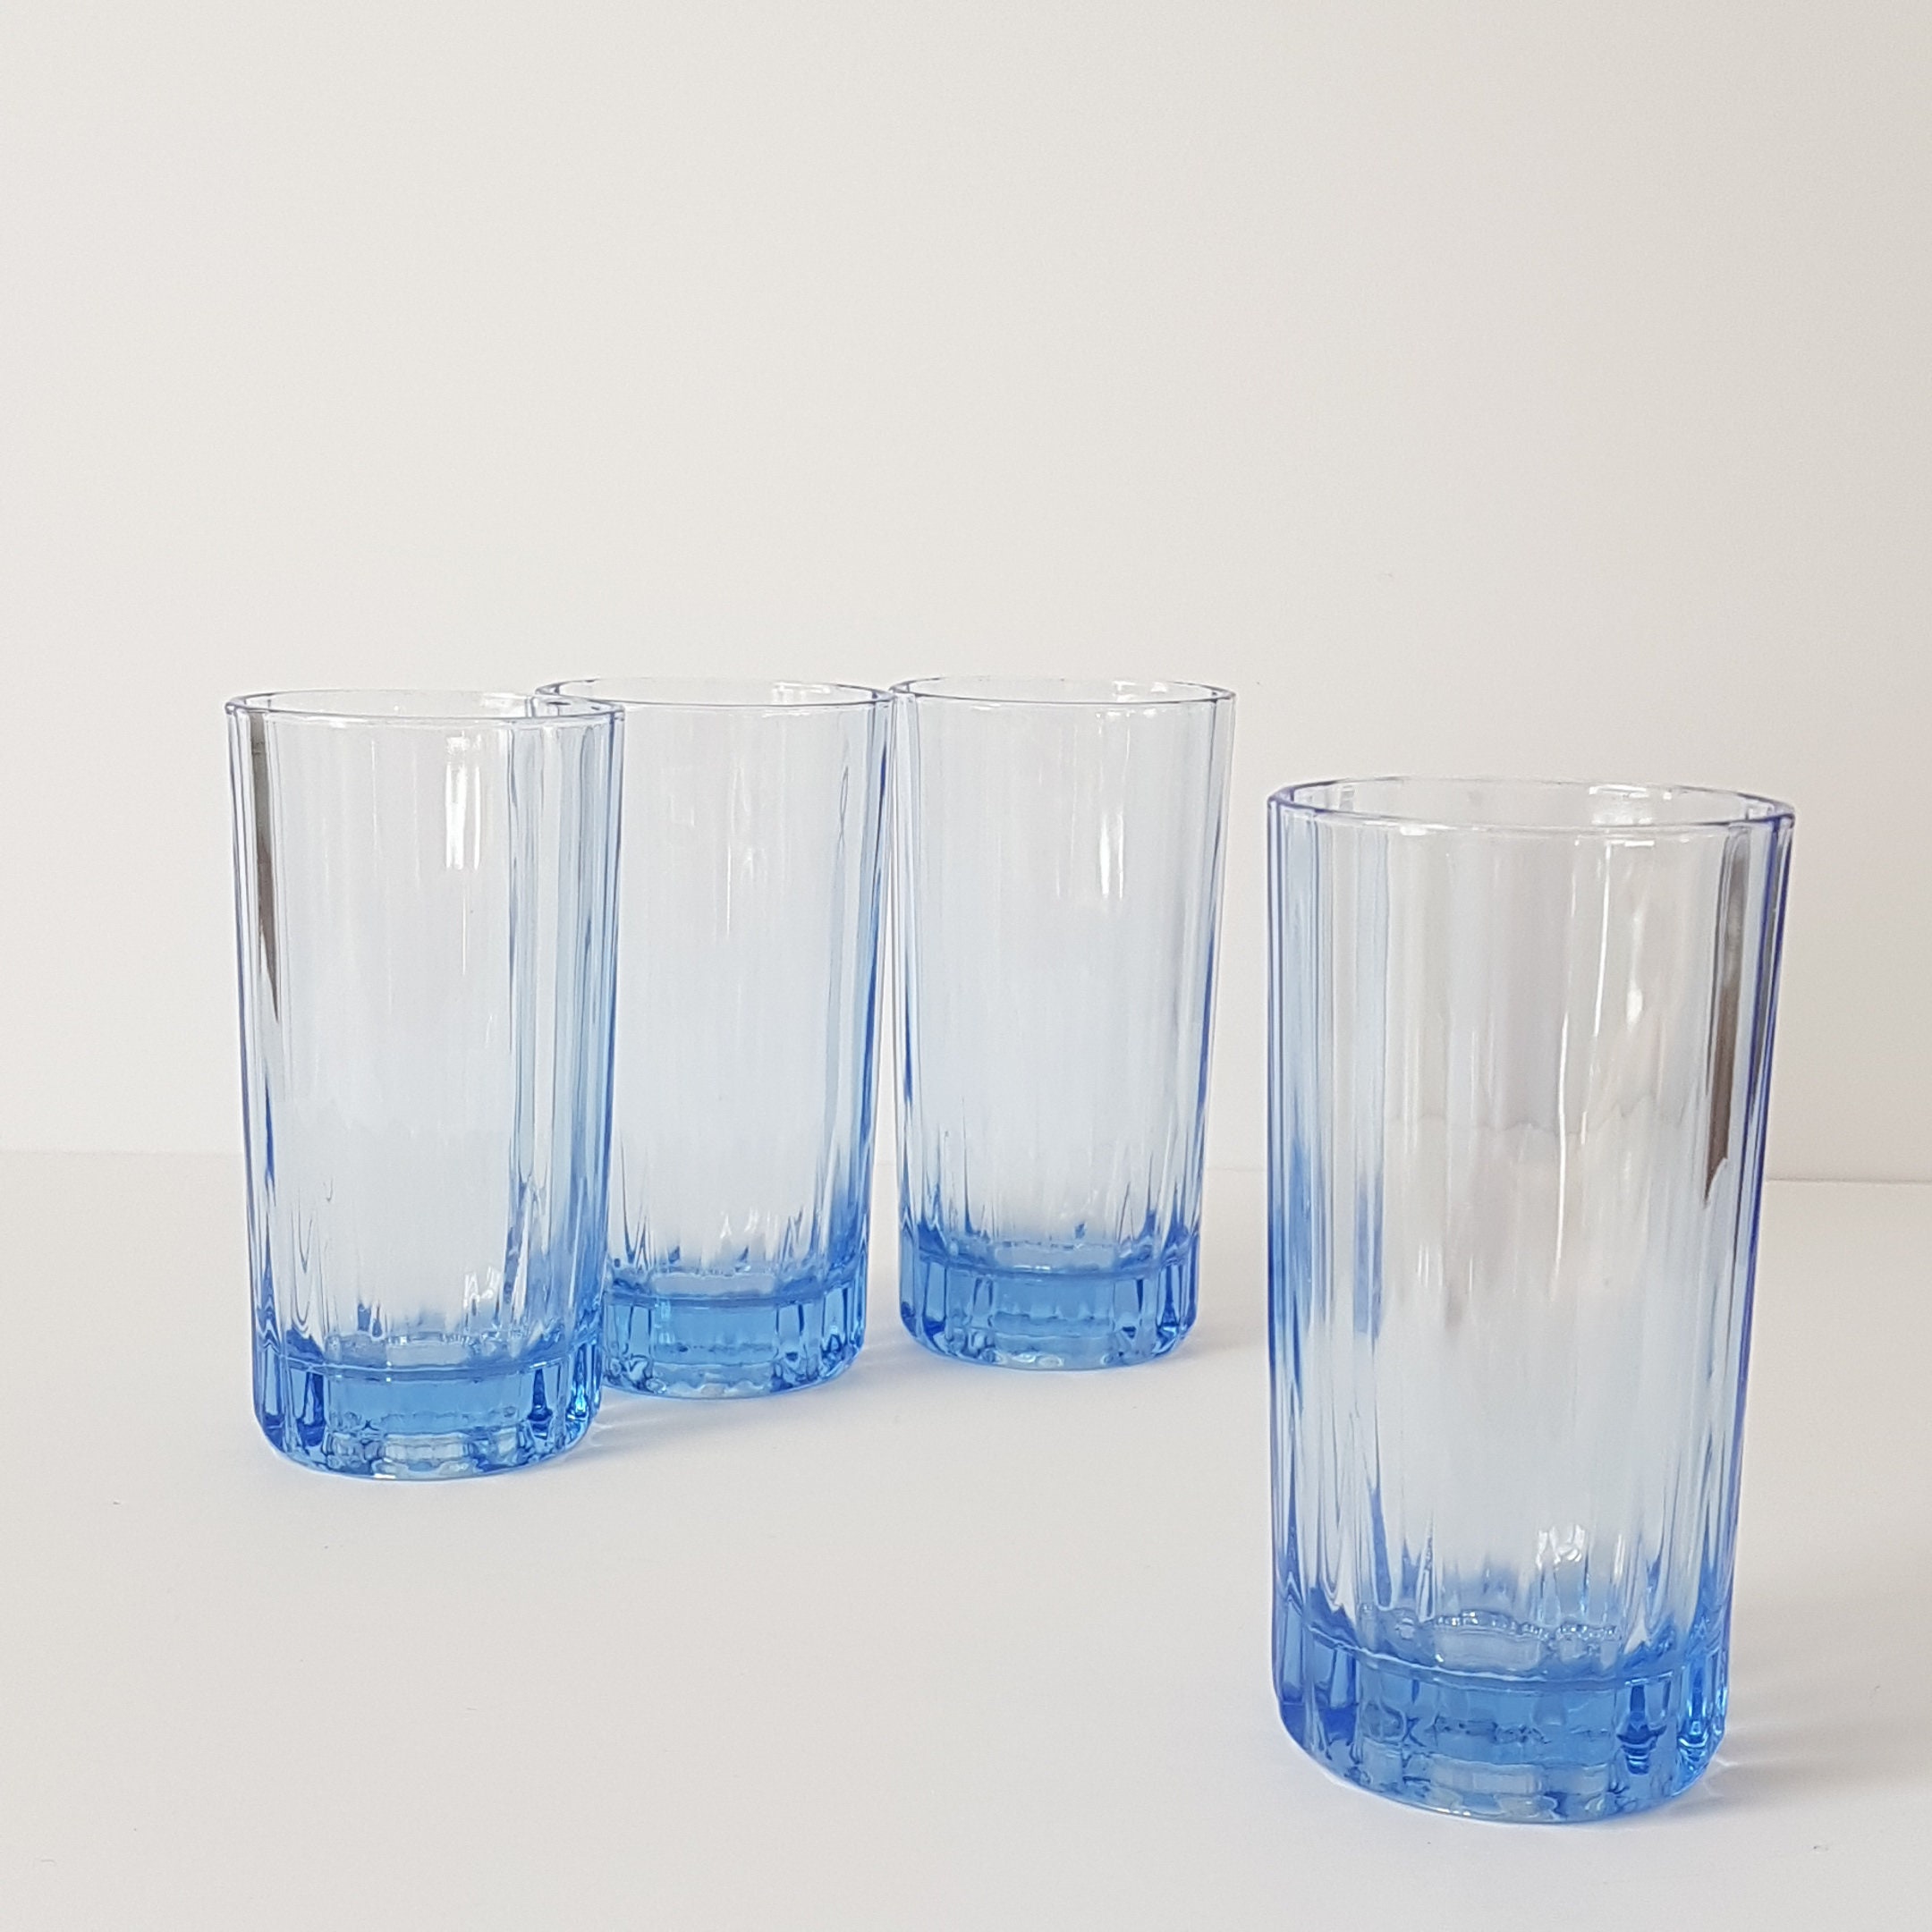 Glassware Drinking Blue Tumbler Pattern Gift Party Desserts Glasses 